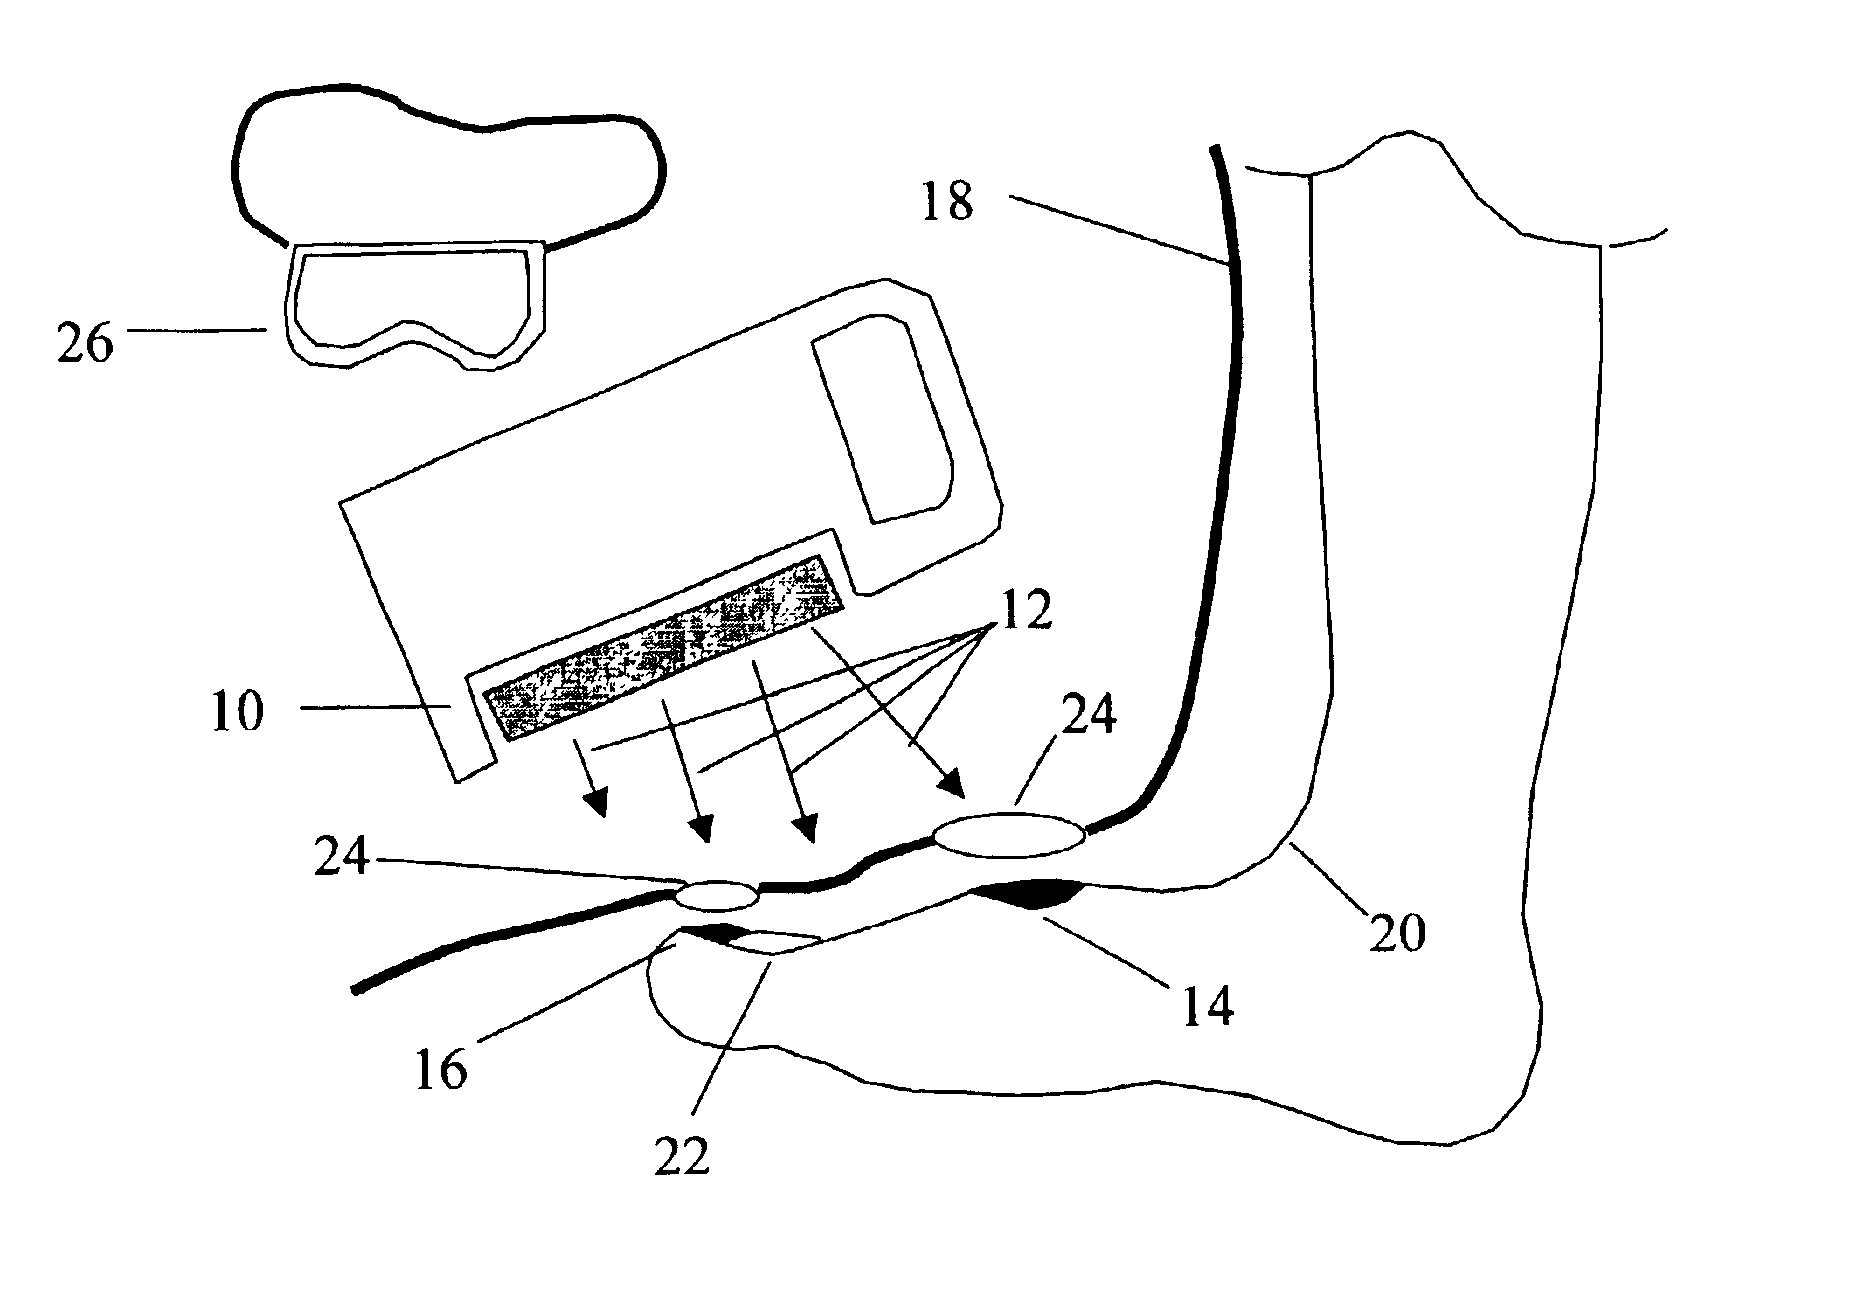 Method for the prevention and treatment of skin and nail infections